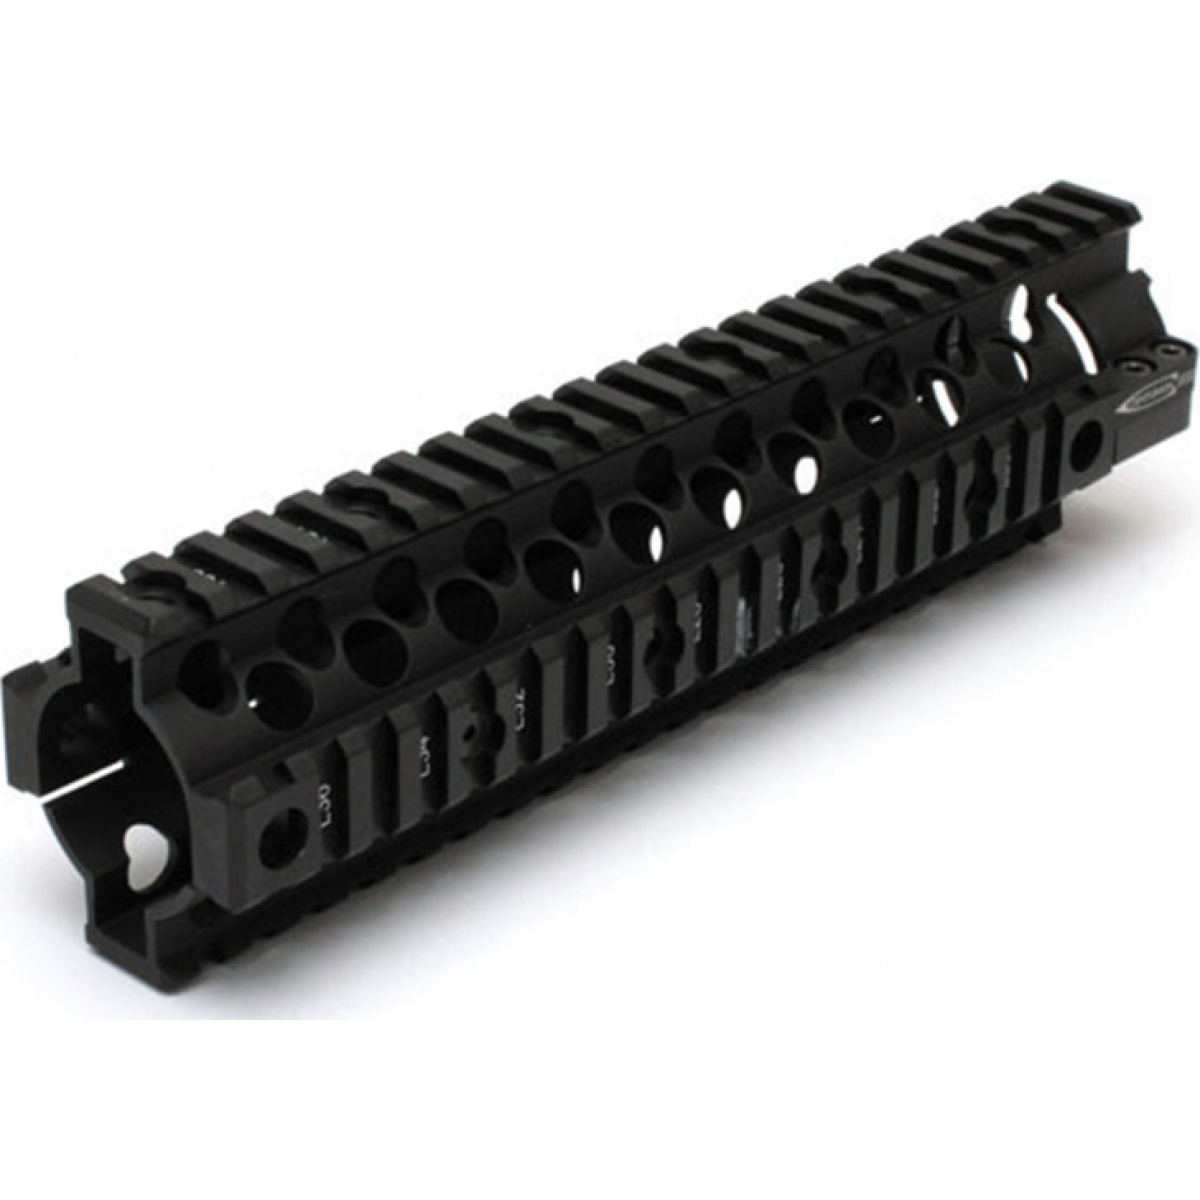 PTS Syndicate Airsoft 9-inch Rail System Free Float Centurion Arms C4 ...